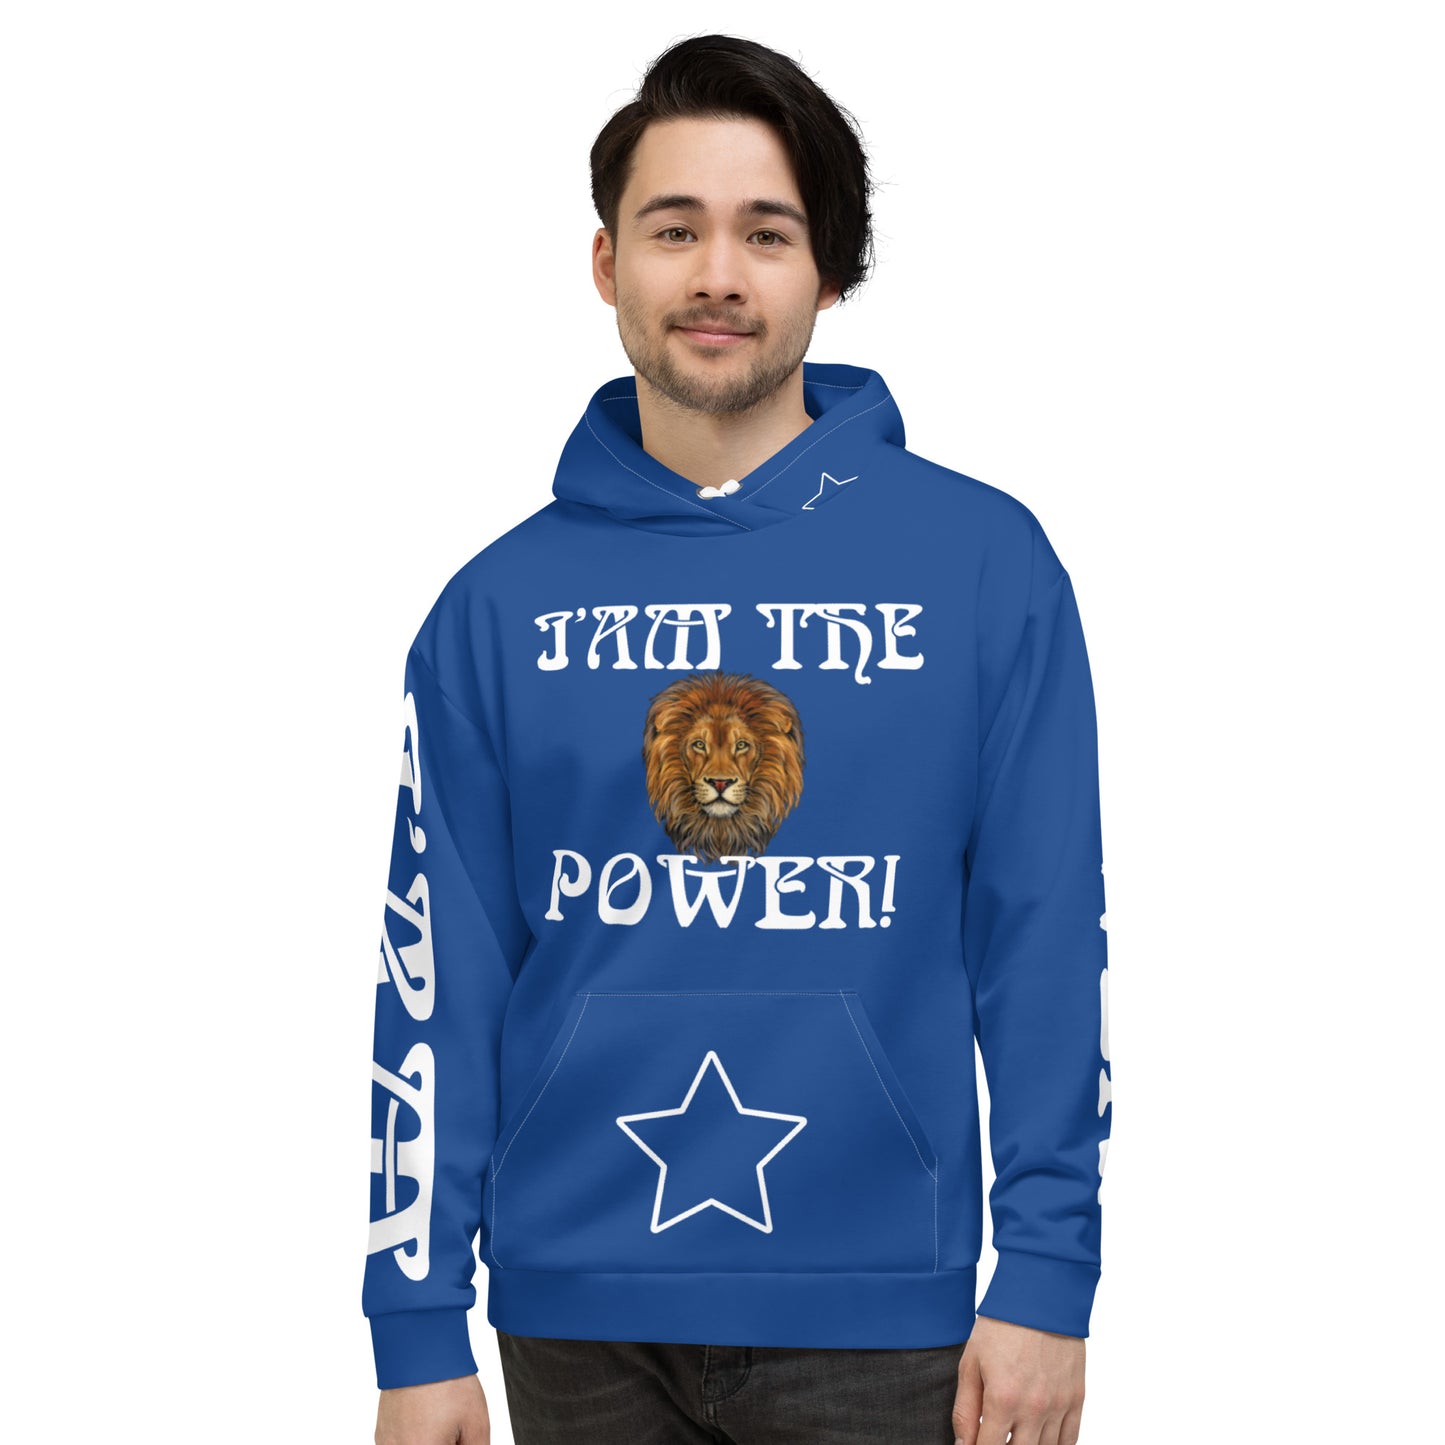 “I’AM THE POWER!”Blue Unisex Hoodie W/White Font